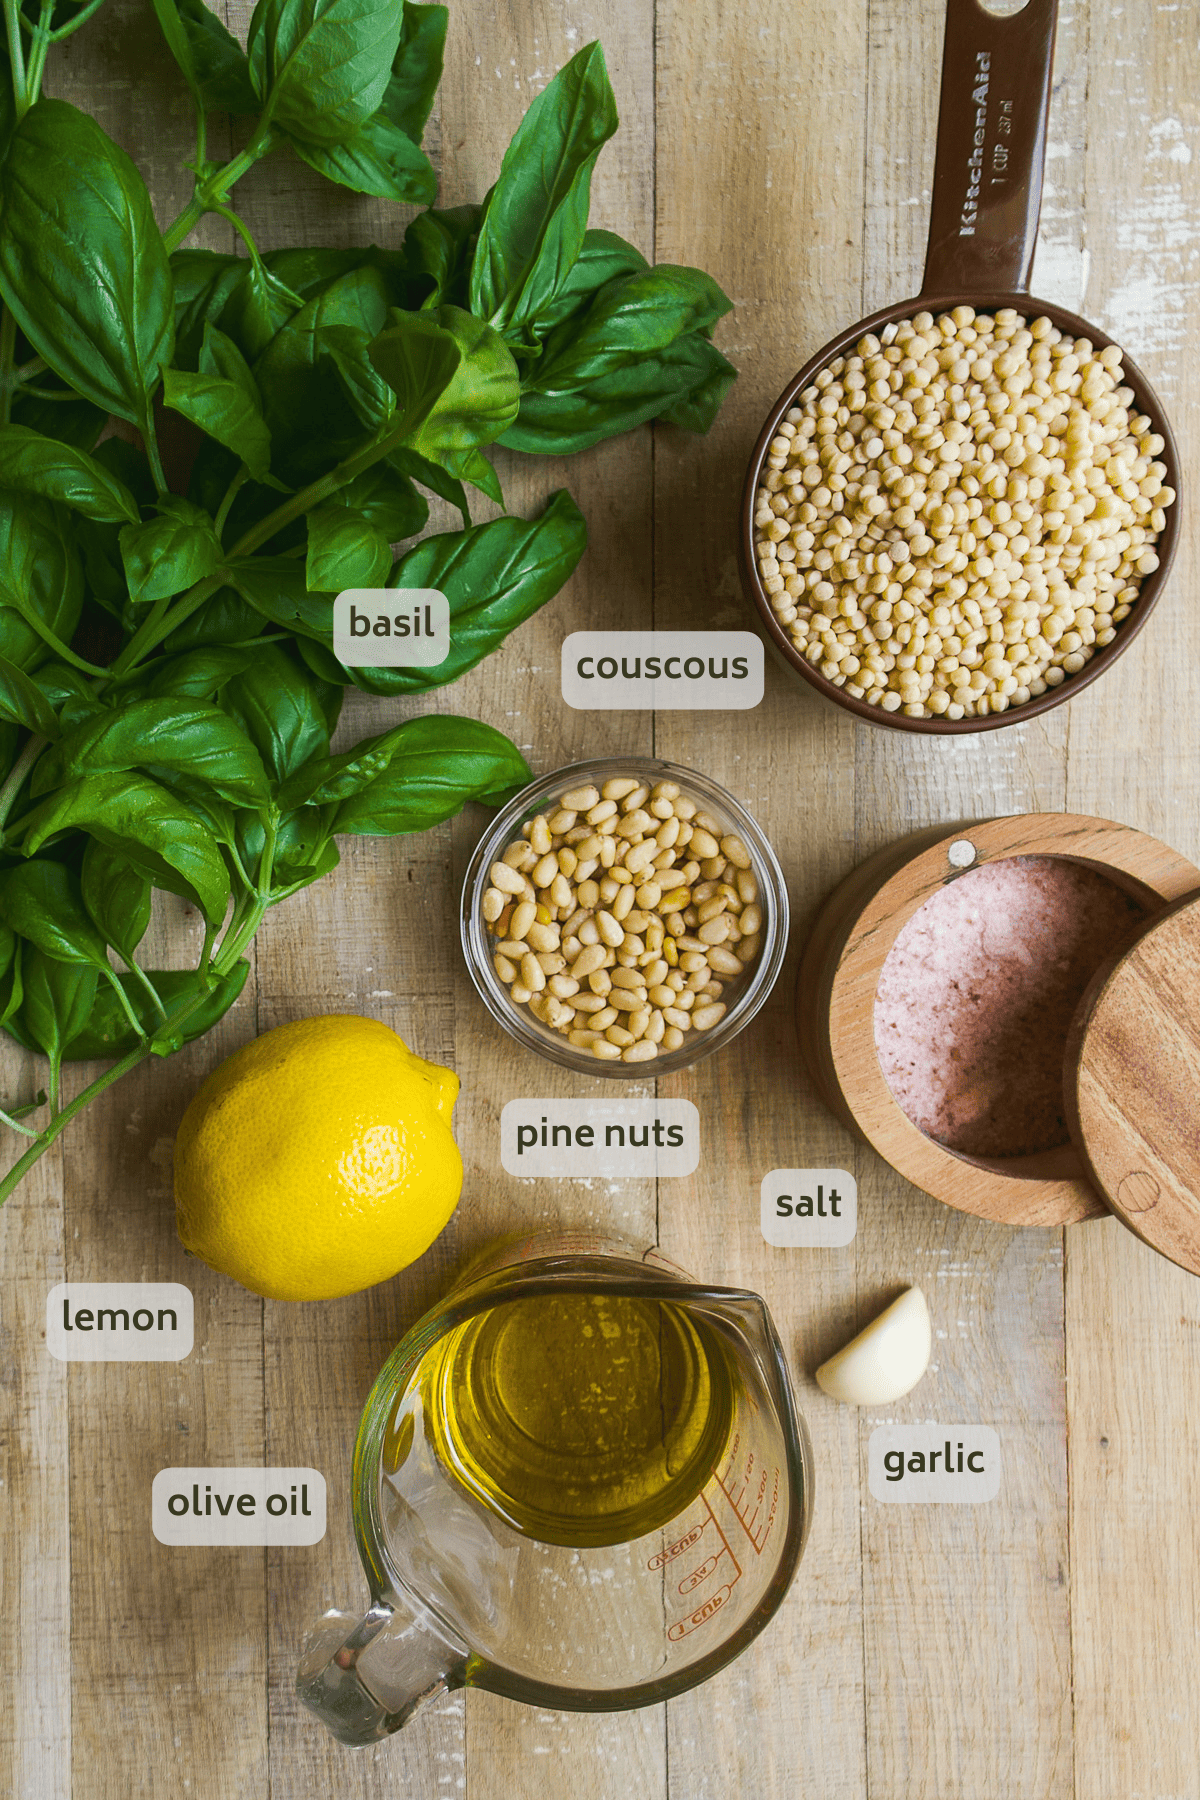 Pesto couscous ingredients on a wooden surface.